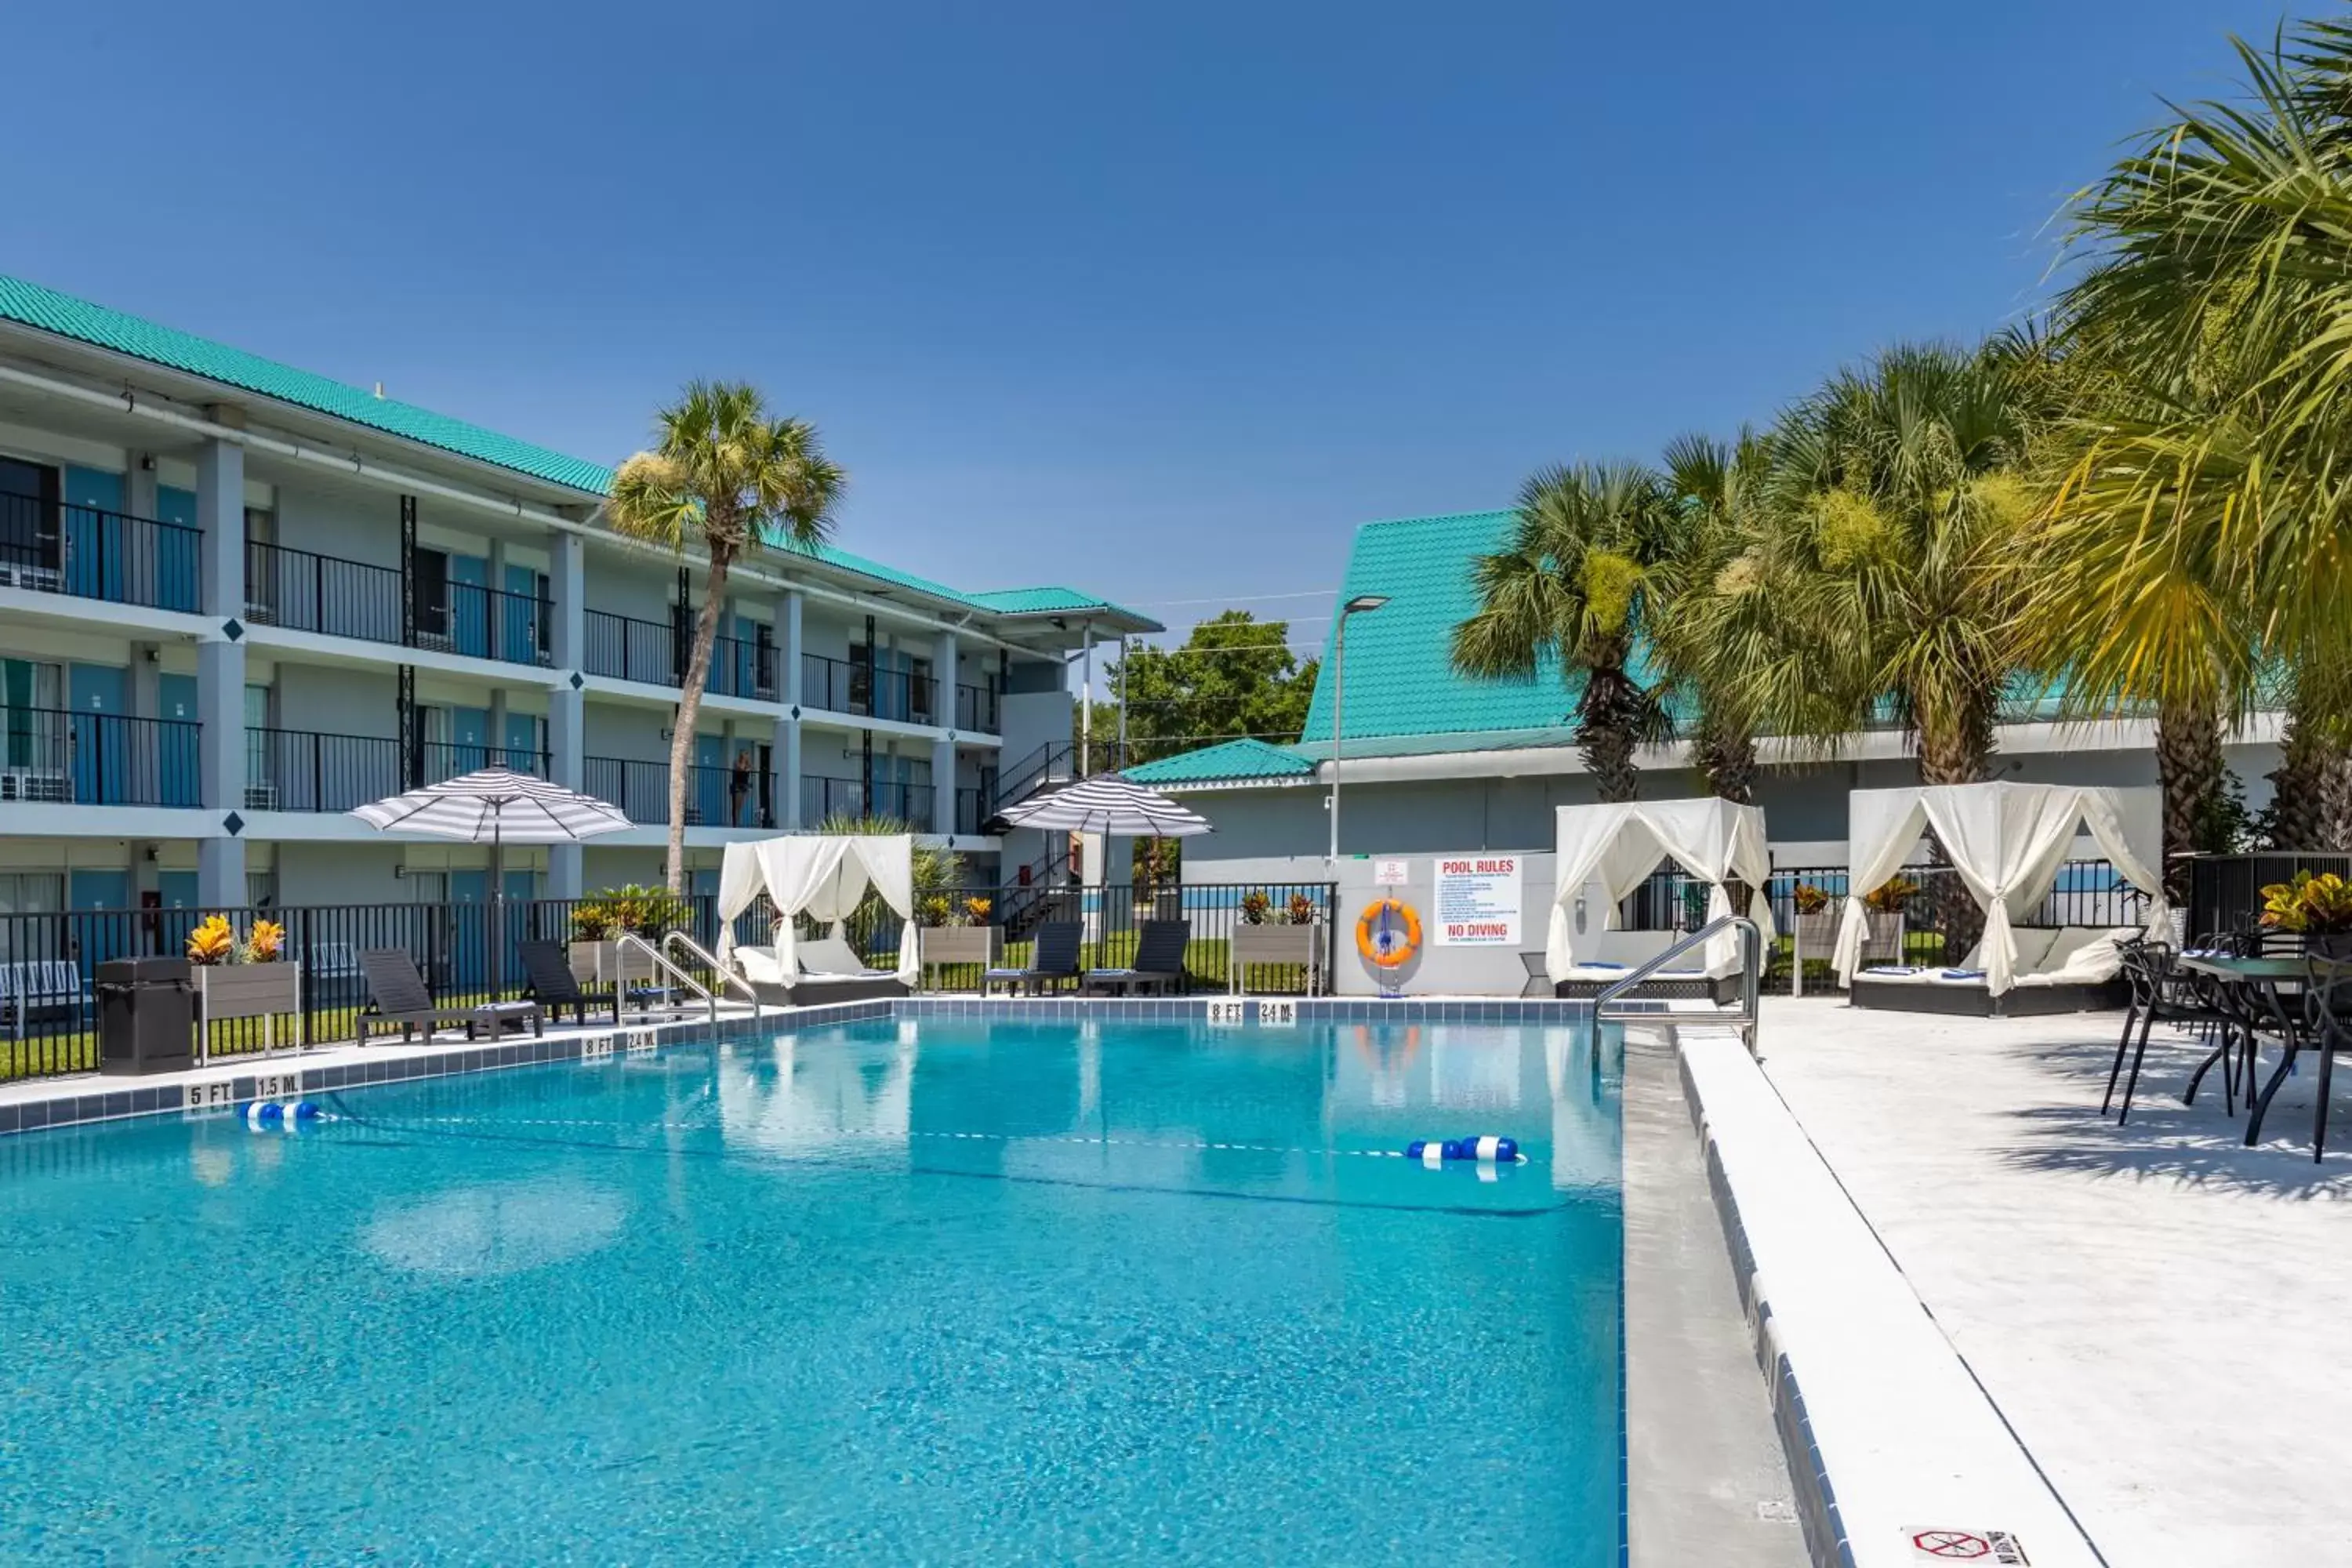 Swimming Pool in Baymont by Wyndham Altamonte Springs